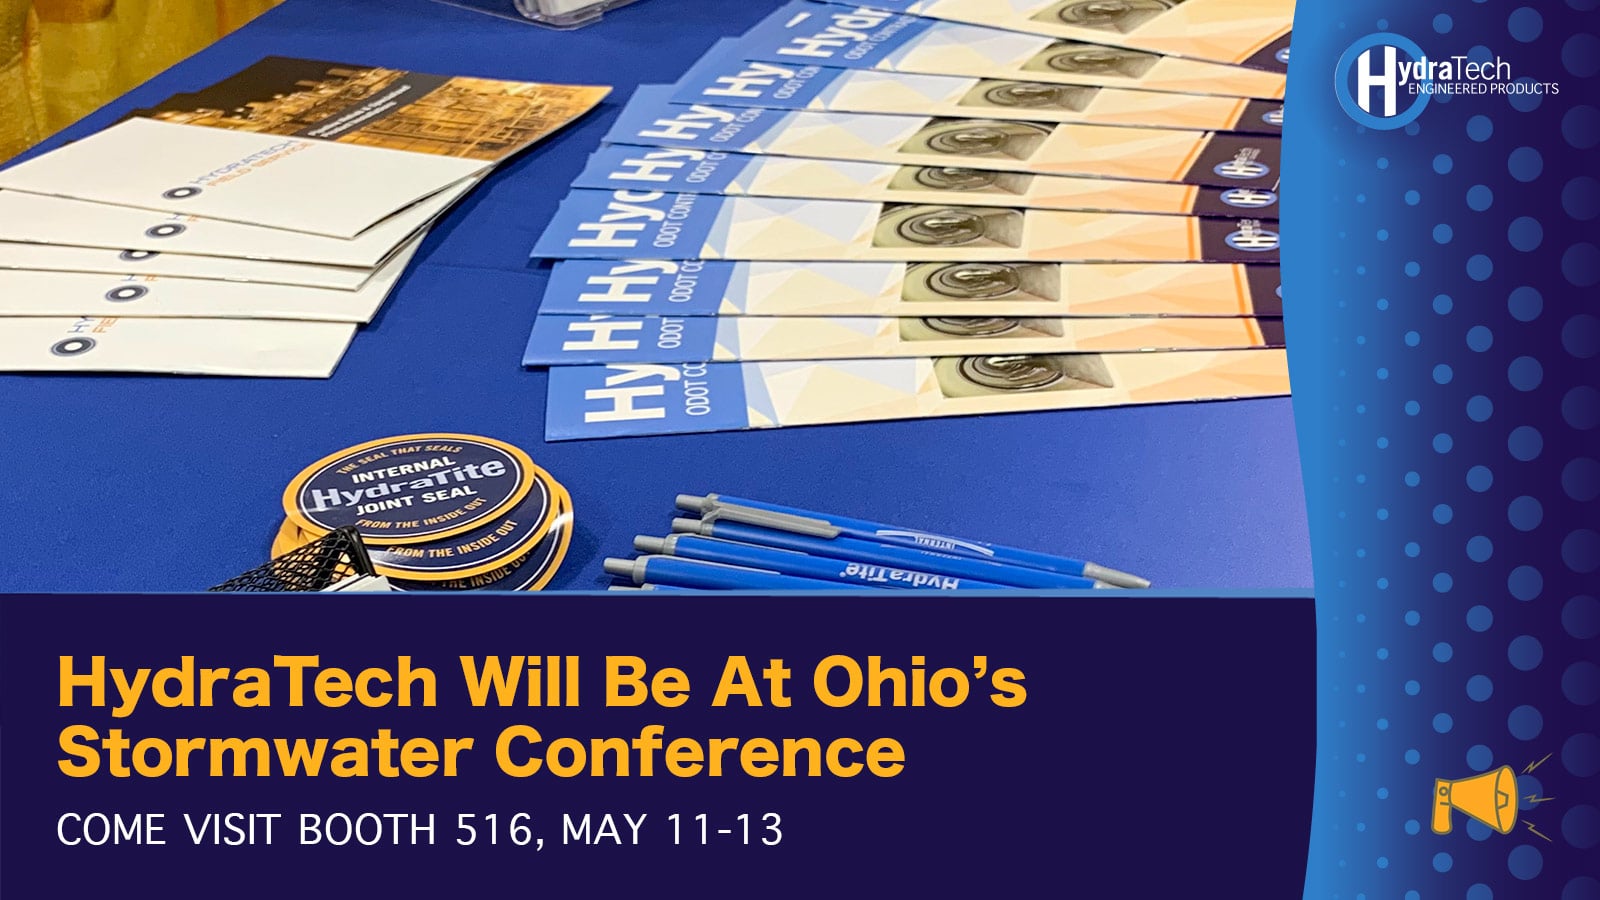 A table of trade show supplies for HydraTech, 'HydraTech Will Be At Ohio's Stormwater Conference, Come Visit Booth 516, May 11-13'